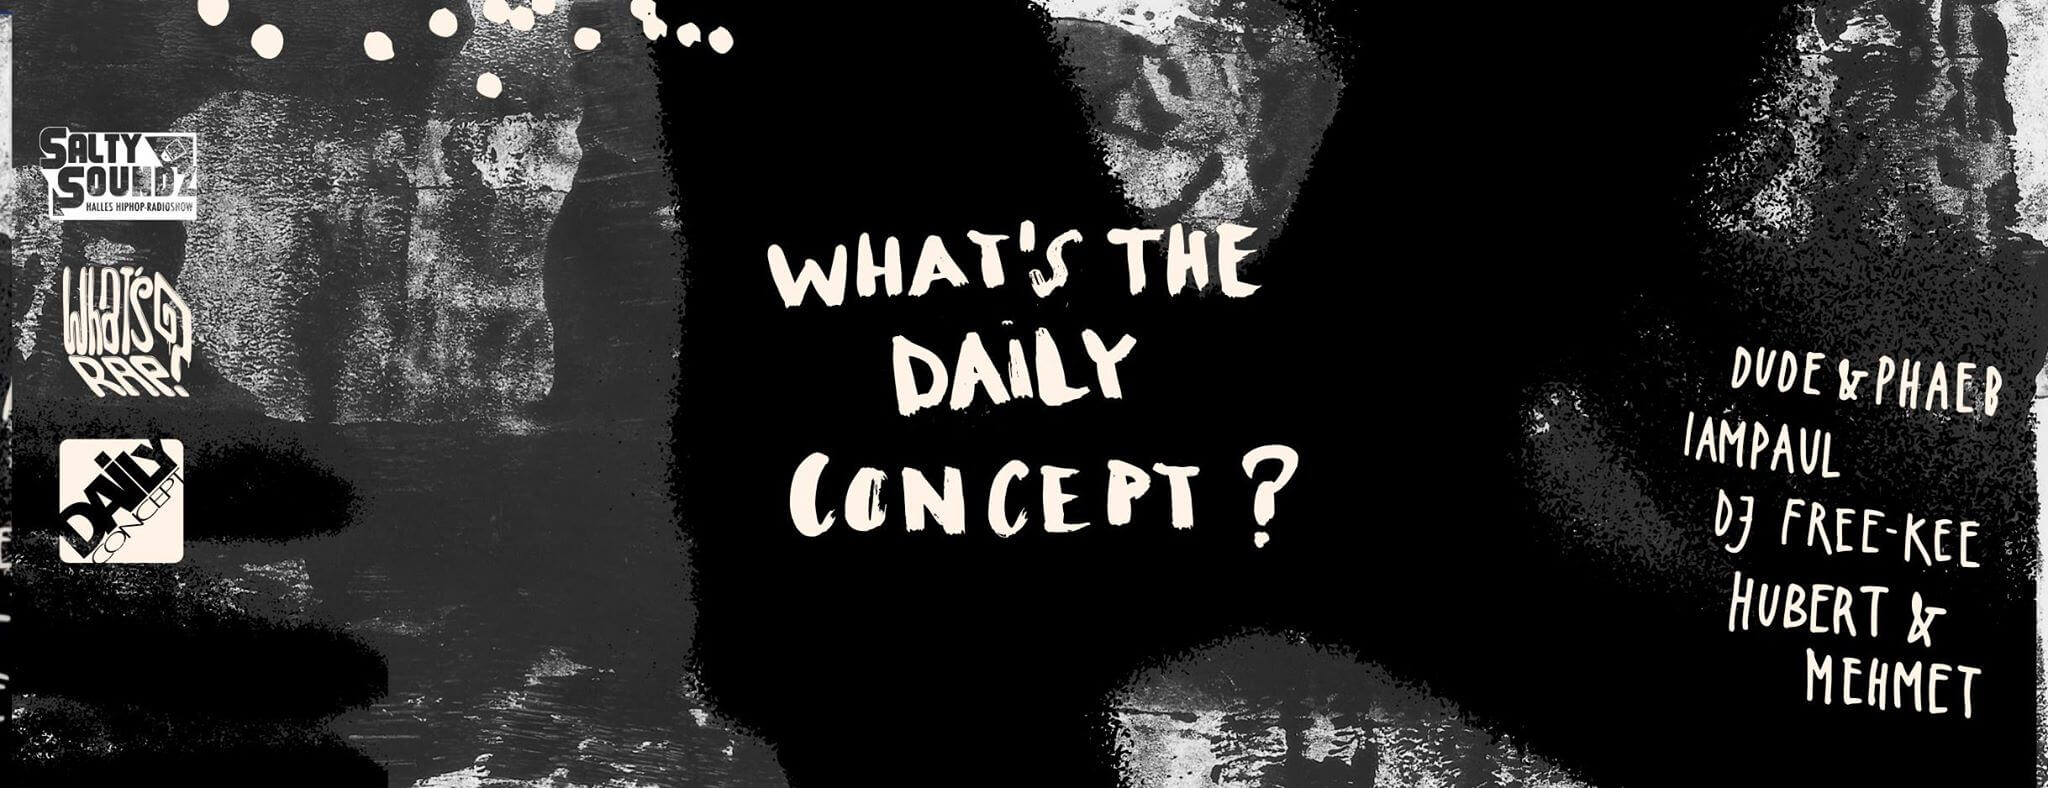 whatsthedailyconcept